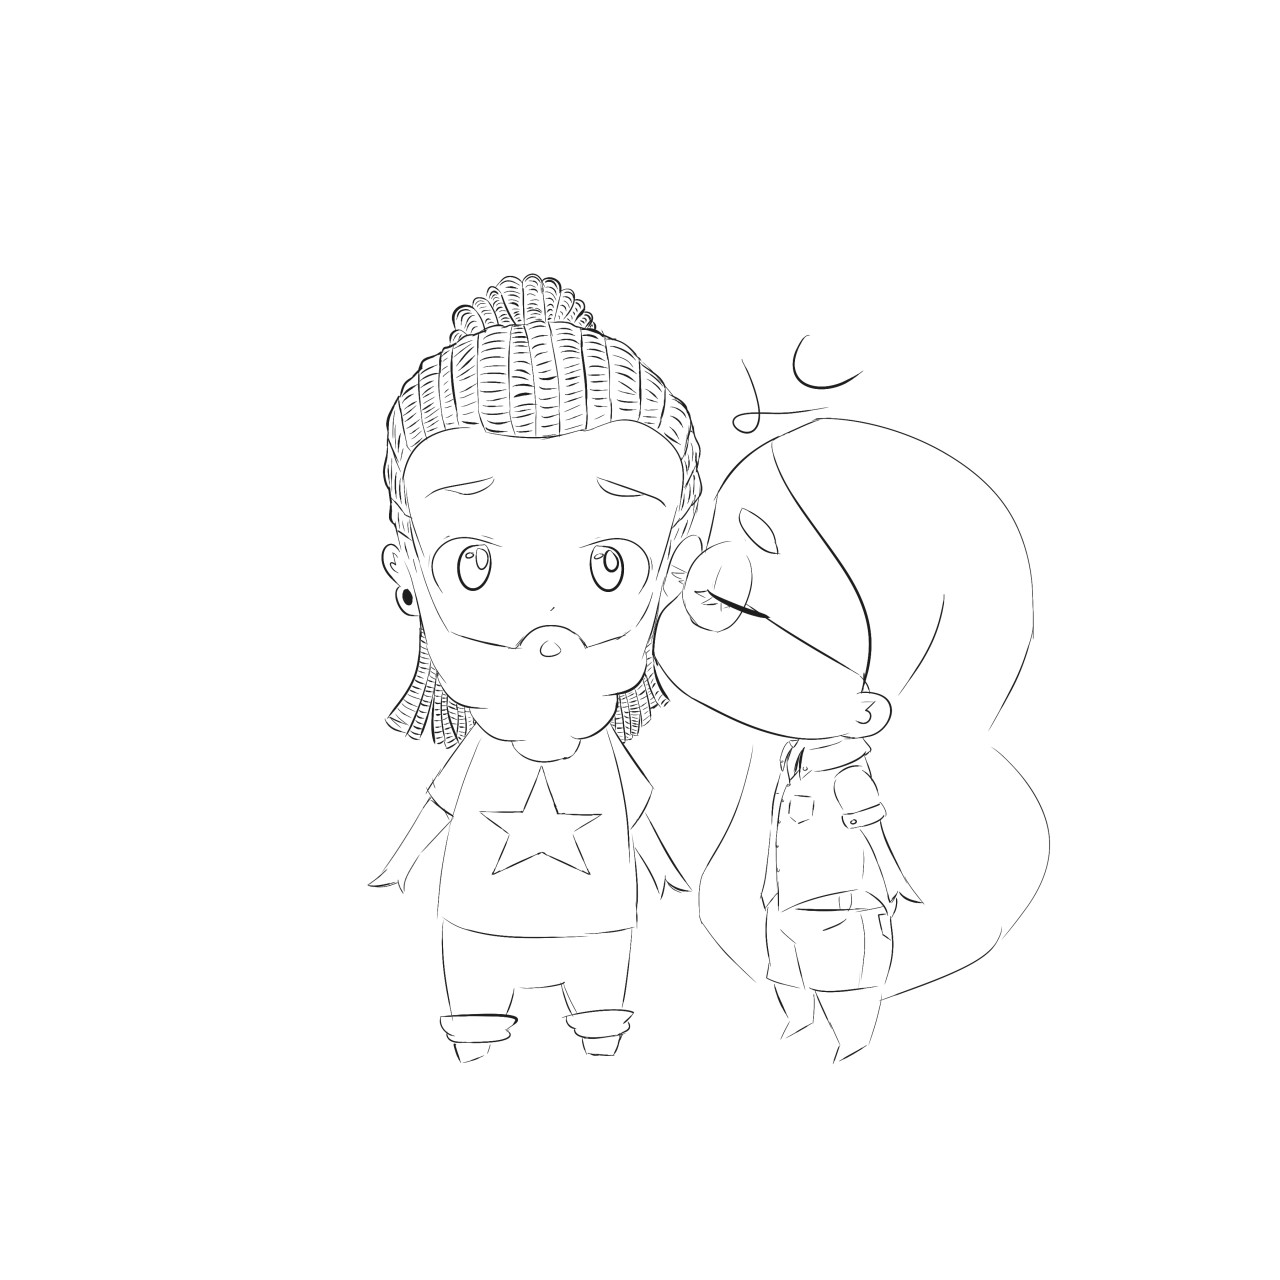 wip of a requested older Steven & Connie. Idk how I feel about the steven (it doesn’t really look like him) but i spent like 15 minutes just lining his hair (also Connie why are you so cute).